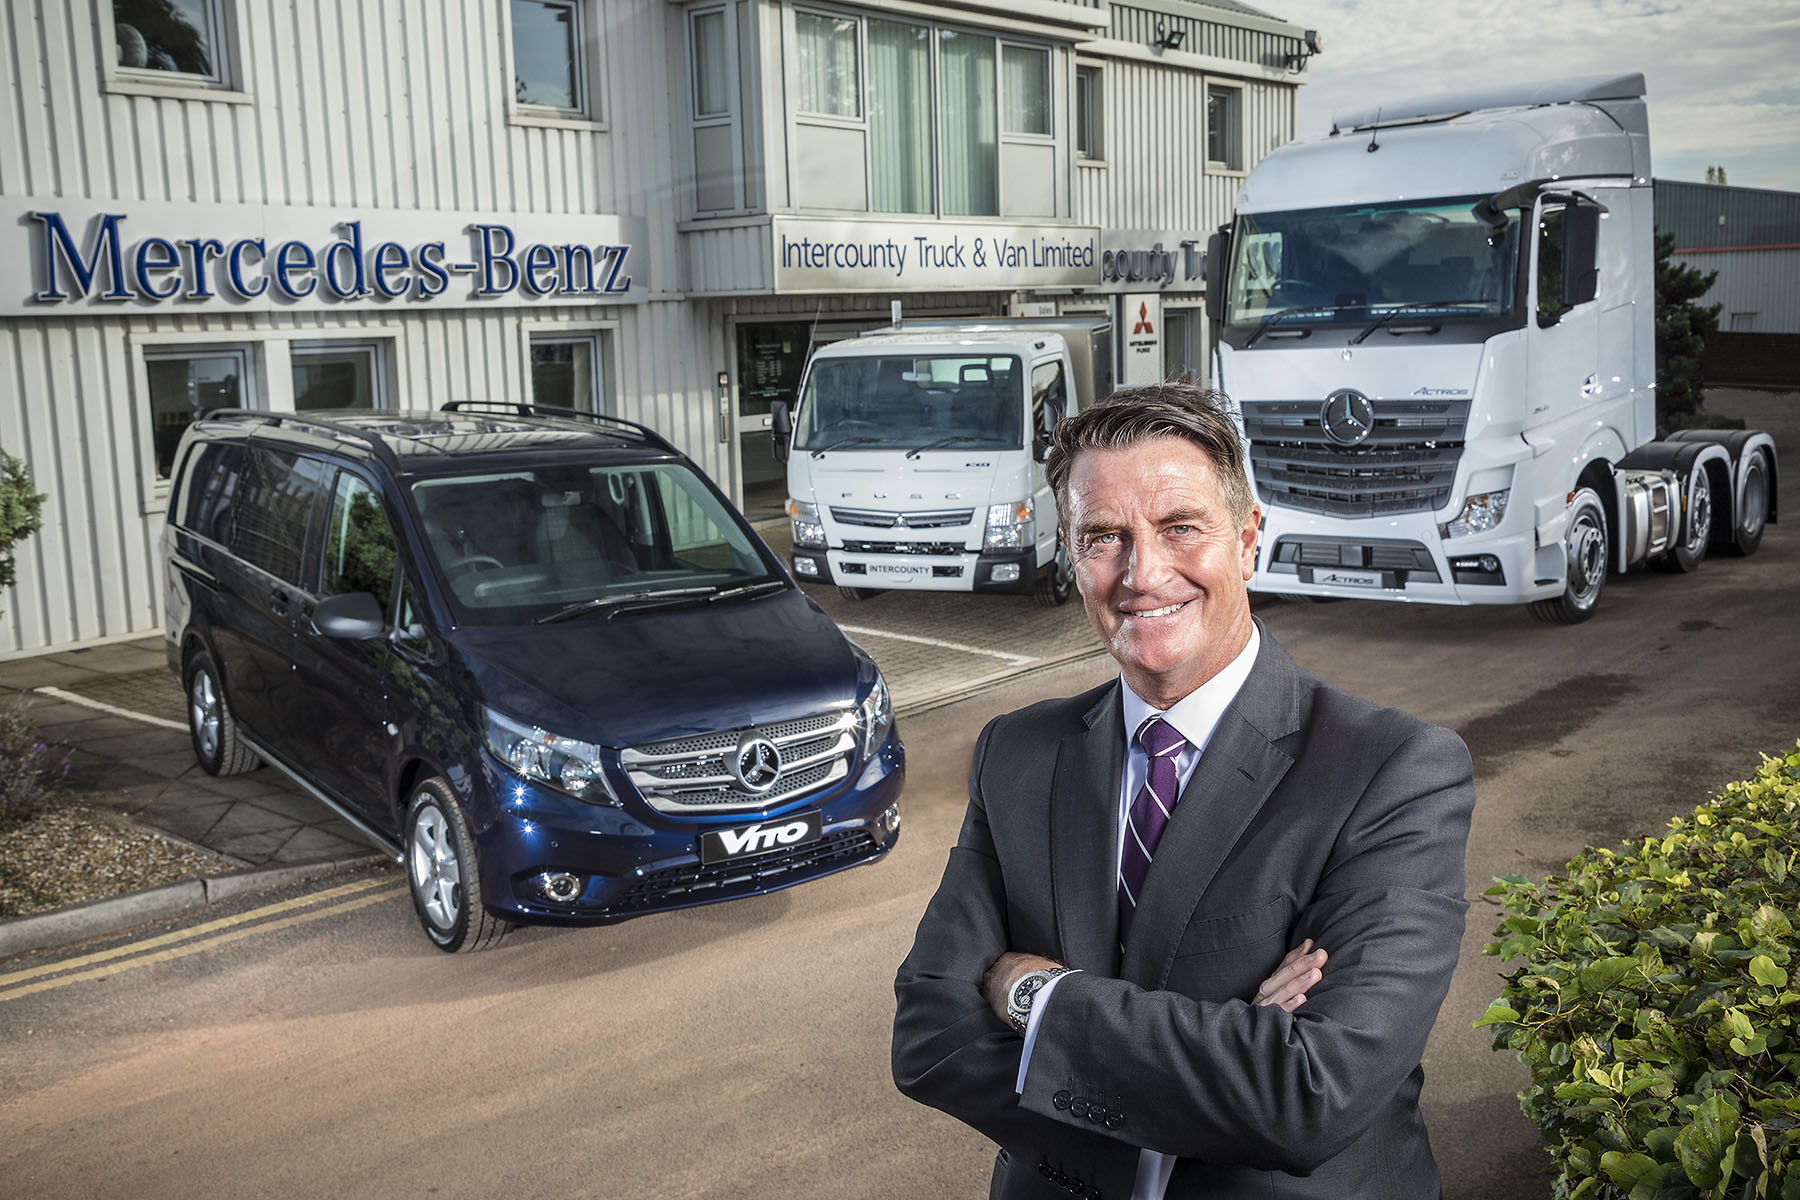 High-profile Elliott comes full circle with new Intercounty Truck & Van role